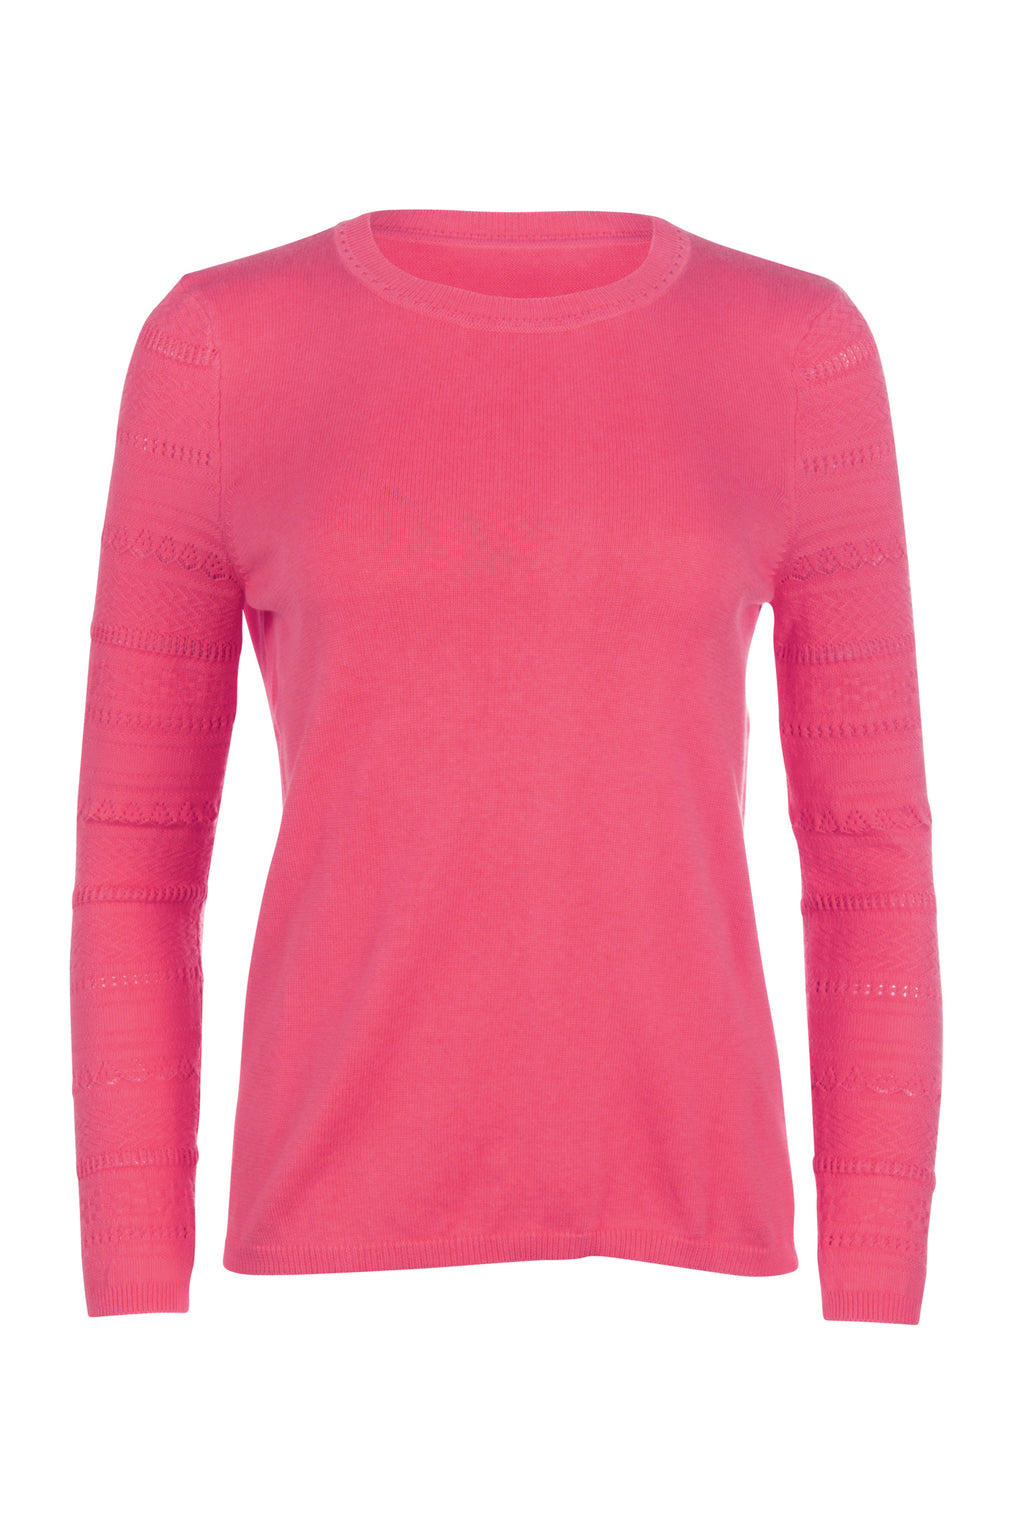 Pointelle Sweater - Pomegranate